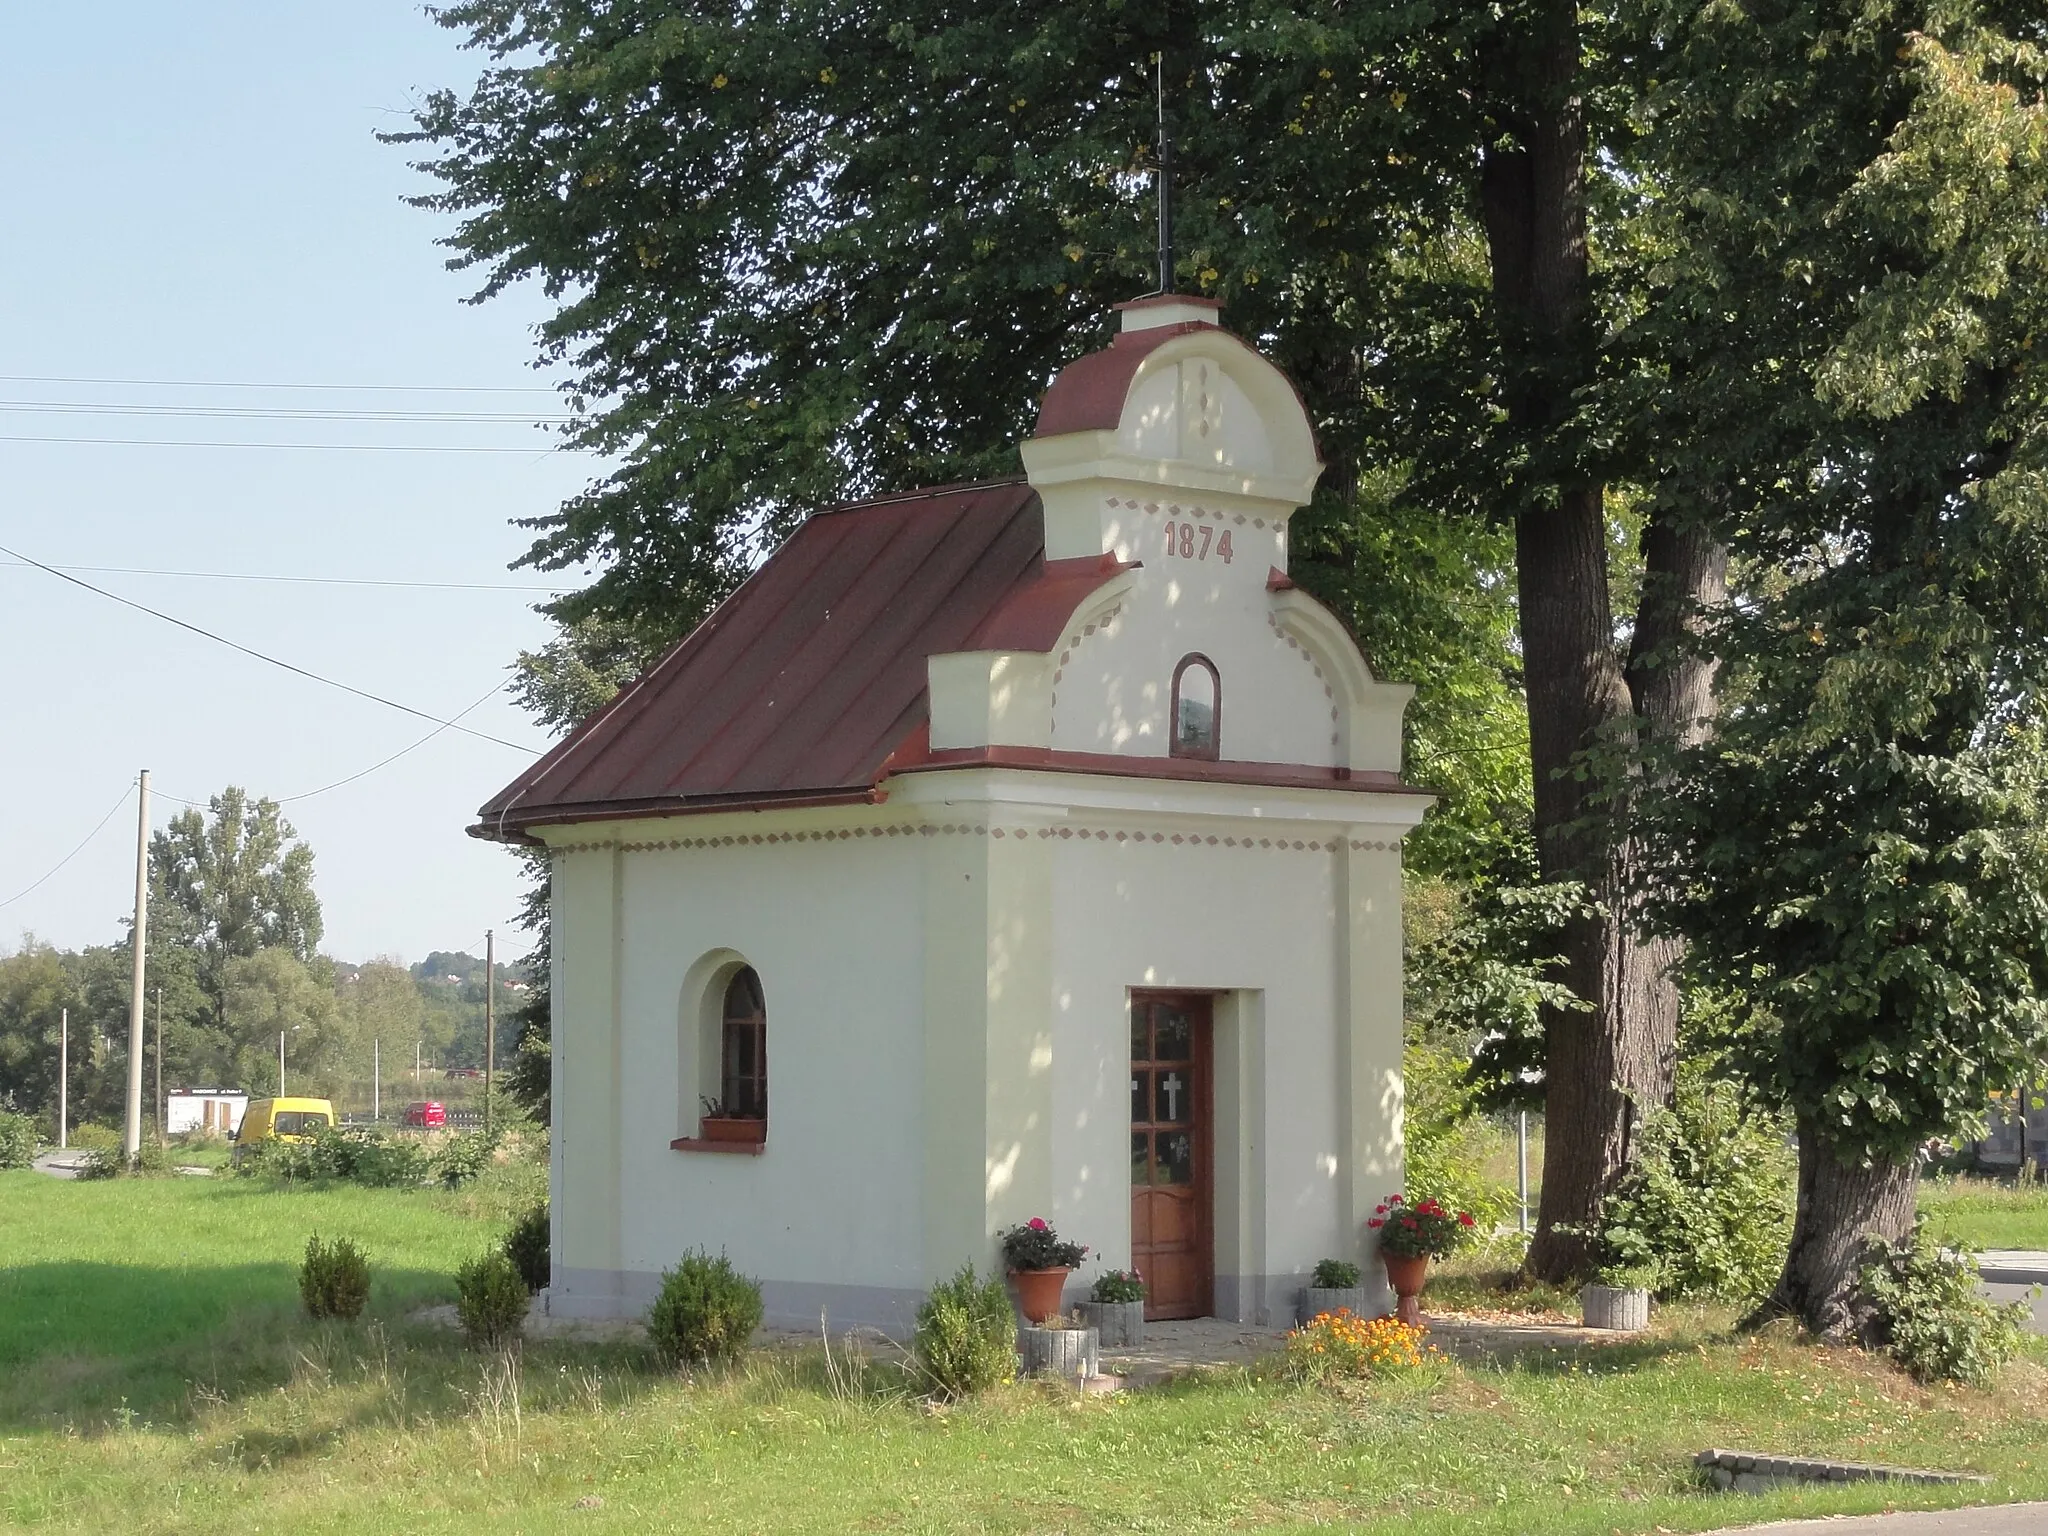 Photo showing: A chapel from 1874 in Frydrychowice